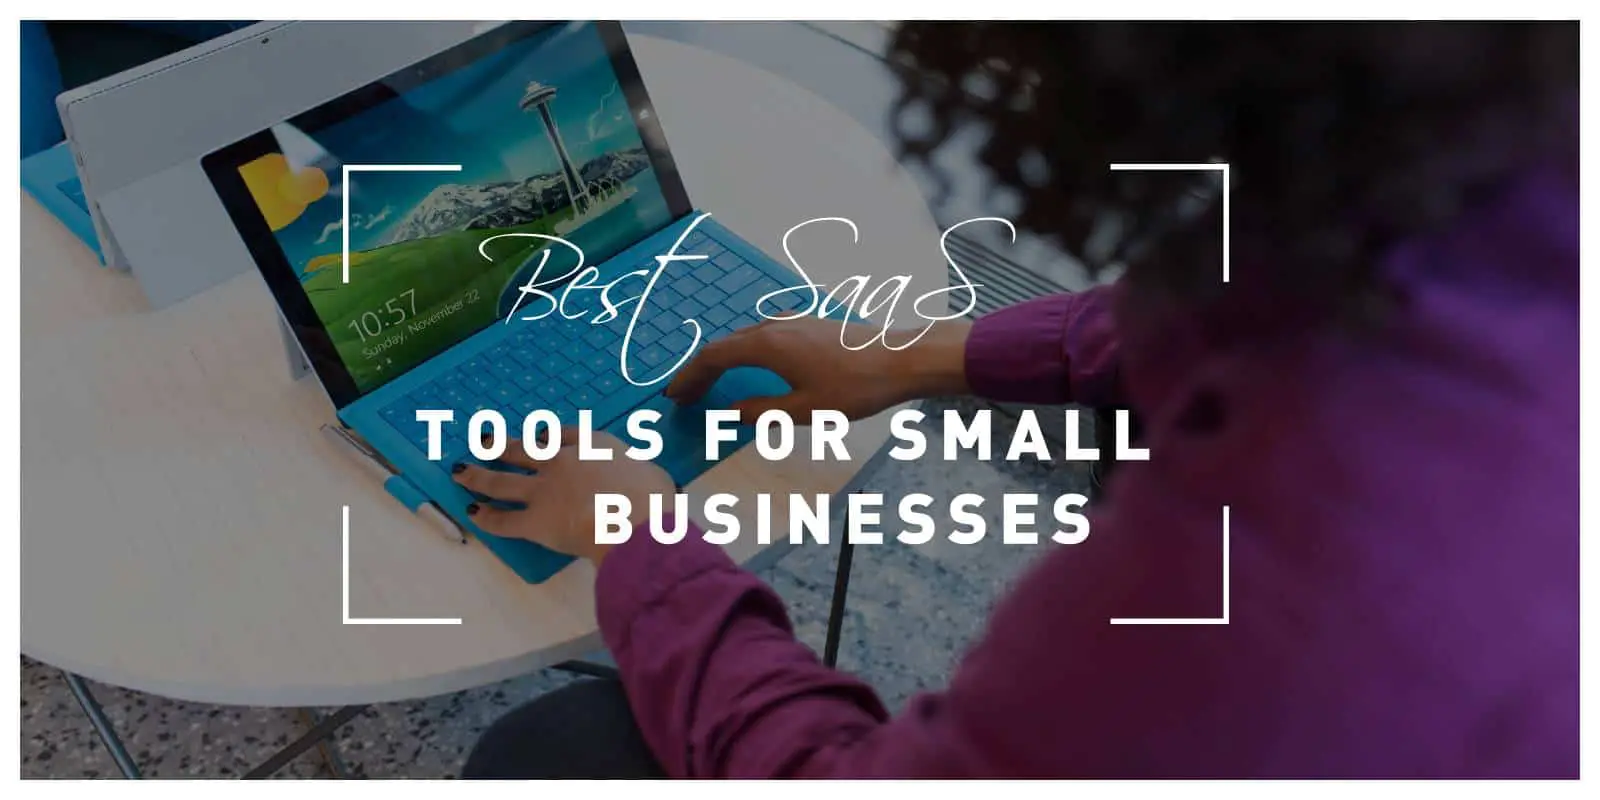 Best SaaS Tools for Small Businesses to Save Money and Focus on Important Aspects of Business